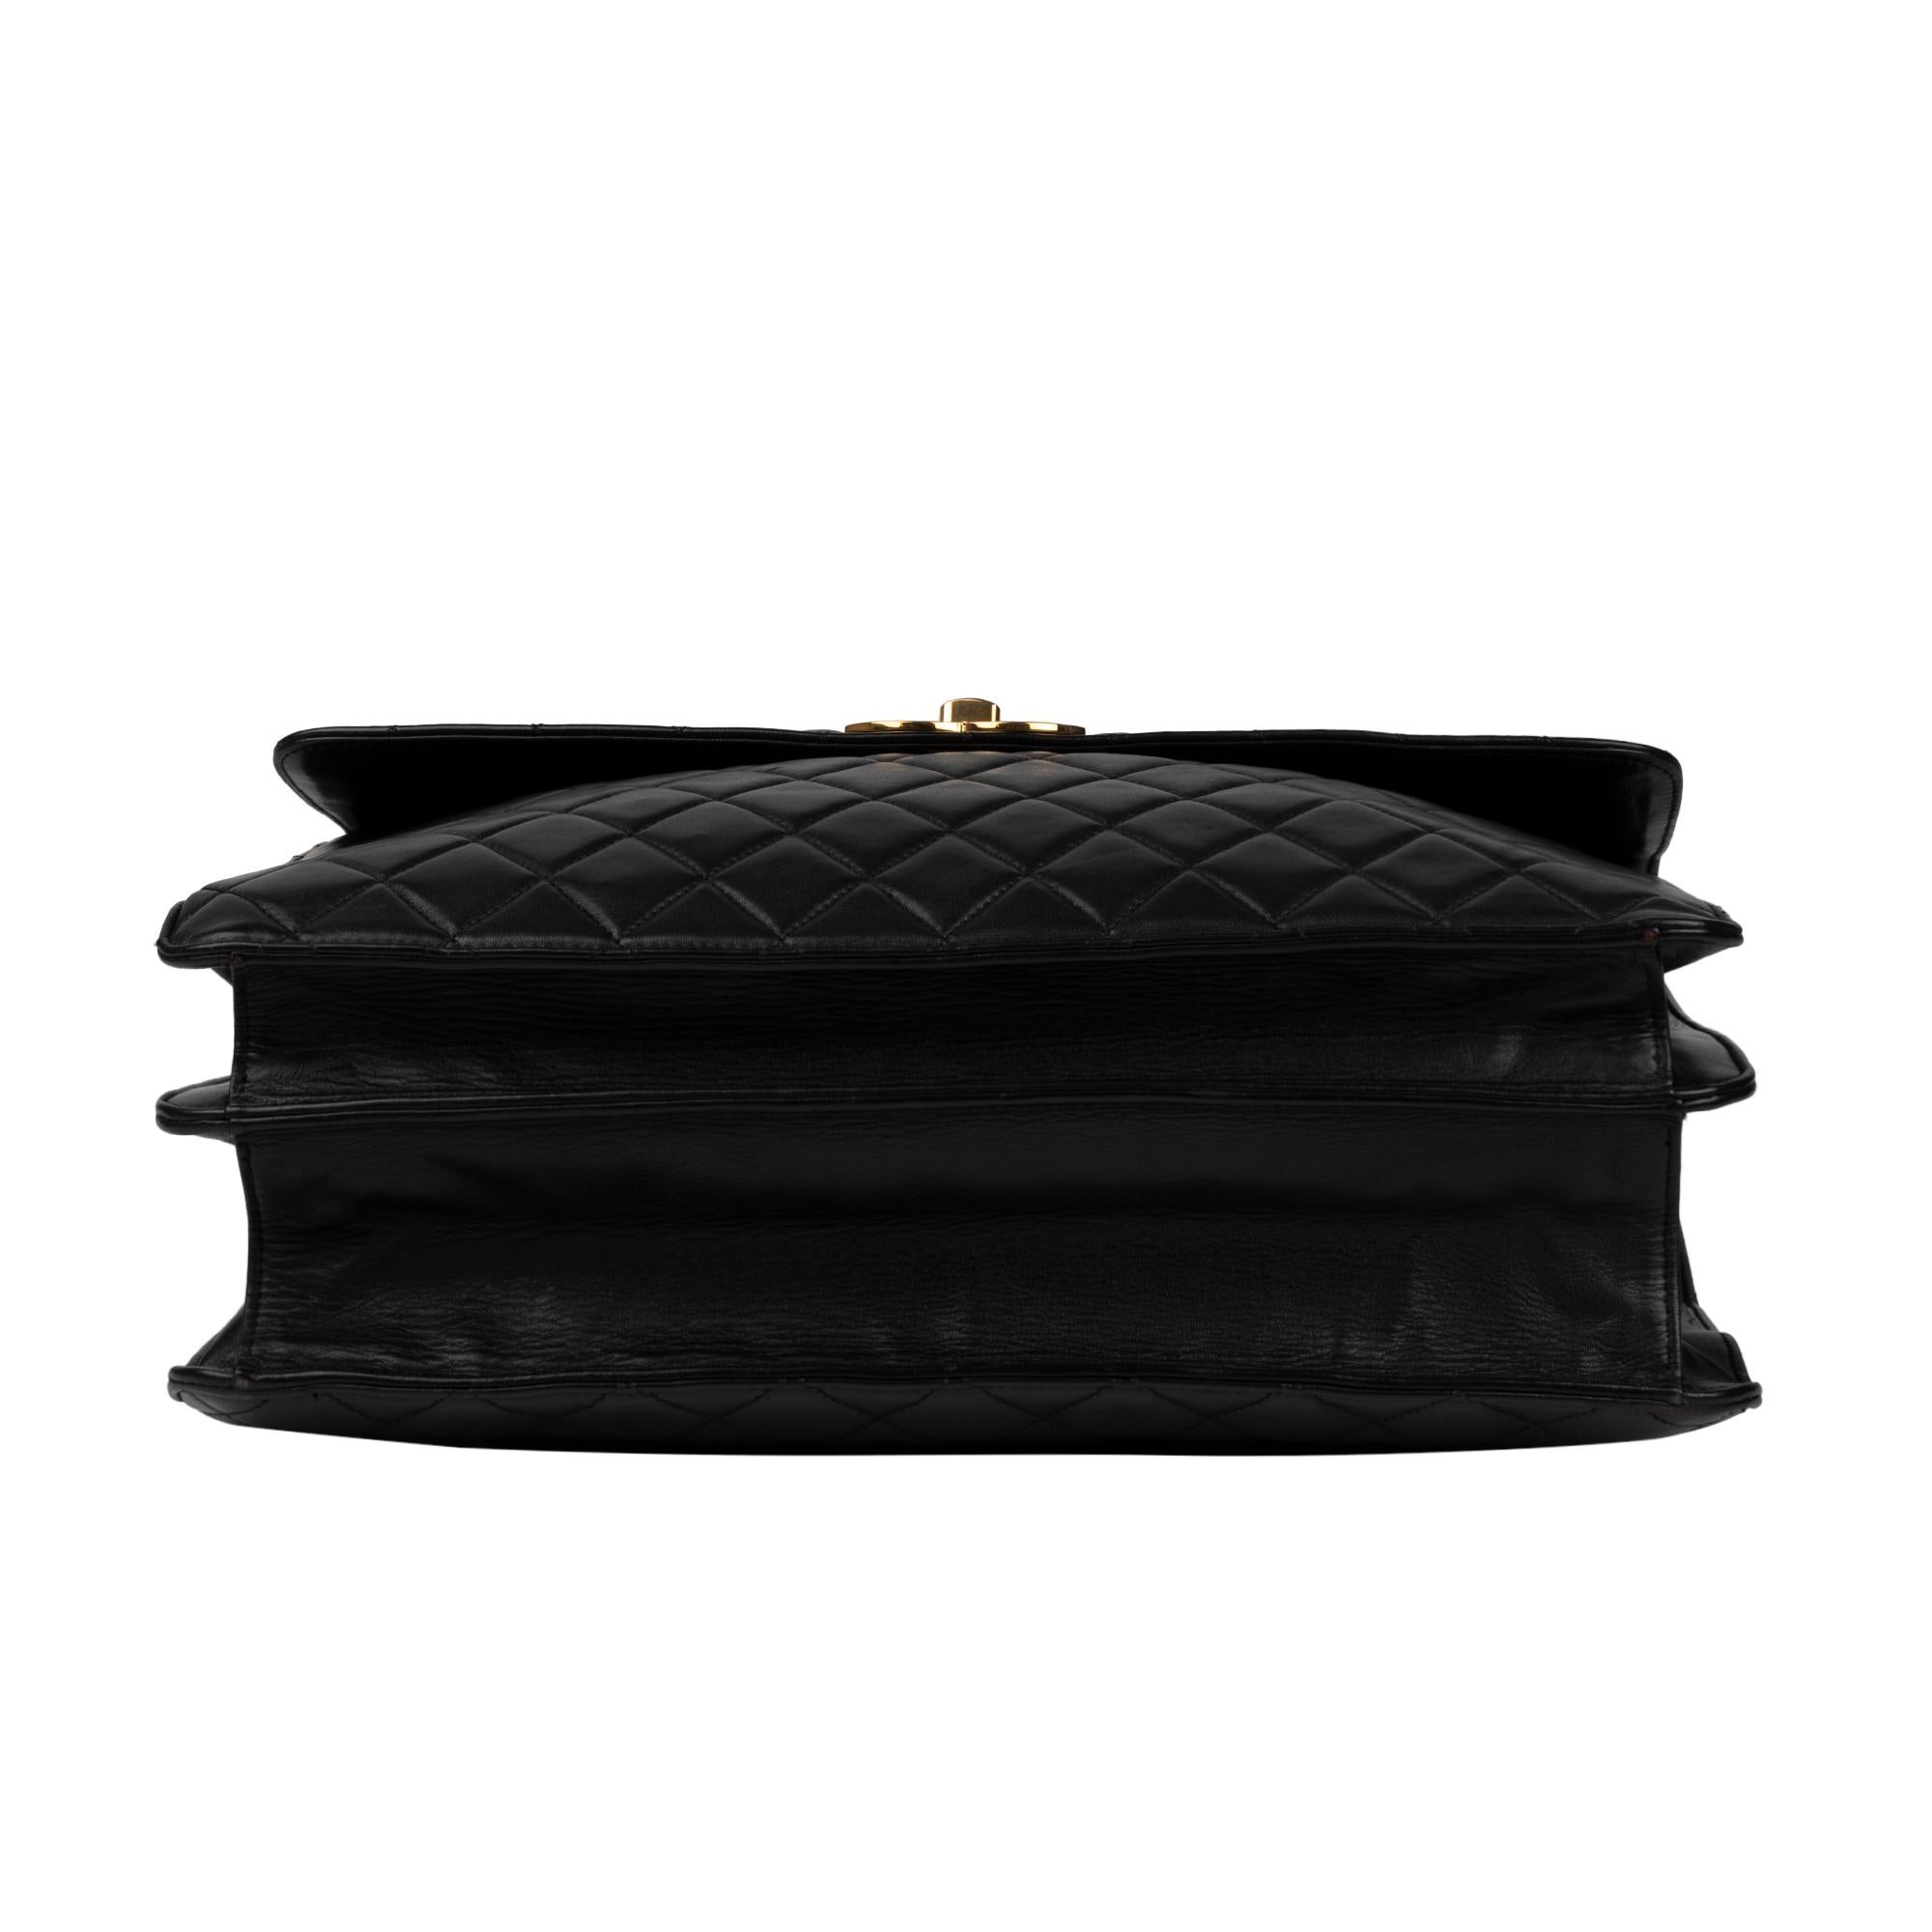 Chanel Black Lamb Skin Leather Briefcase 4